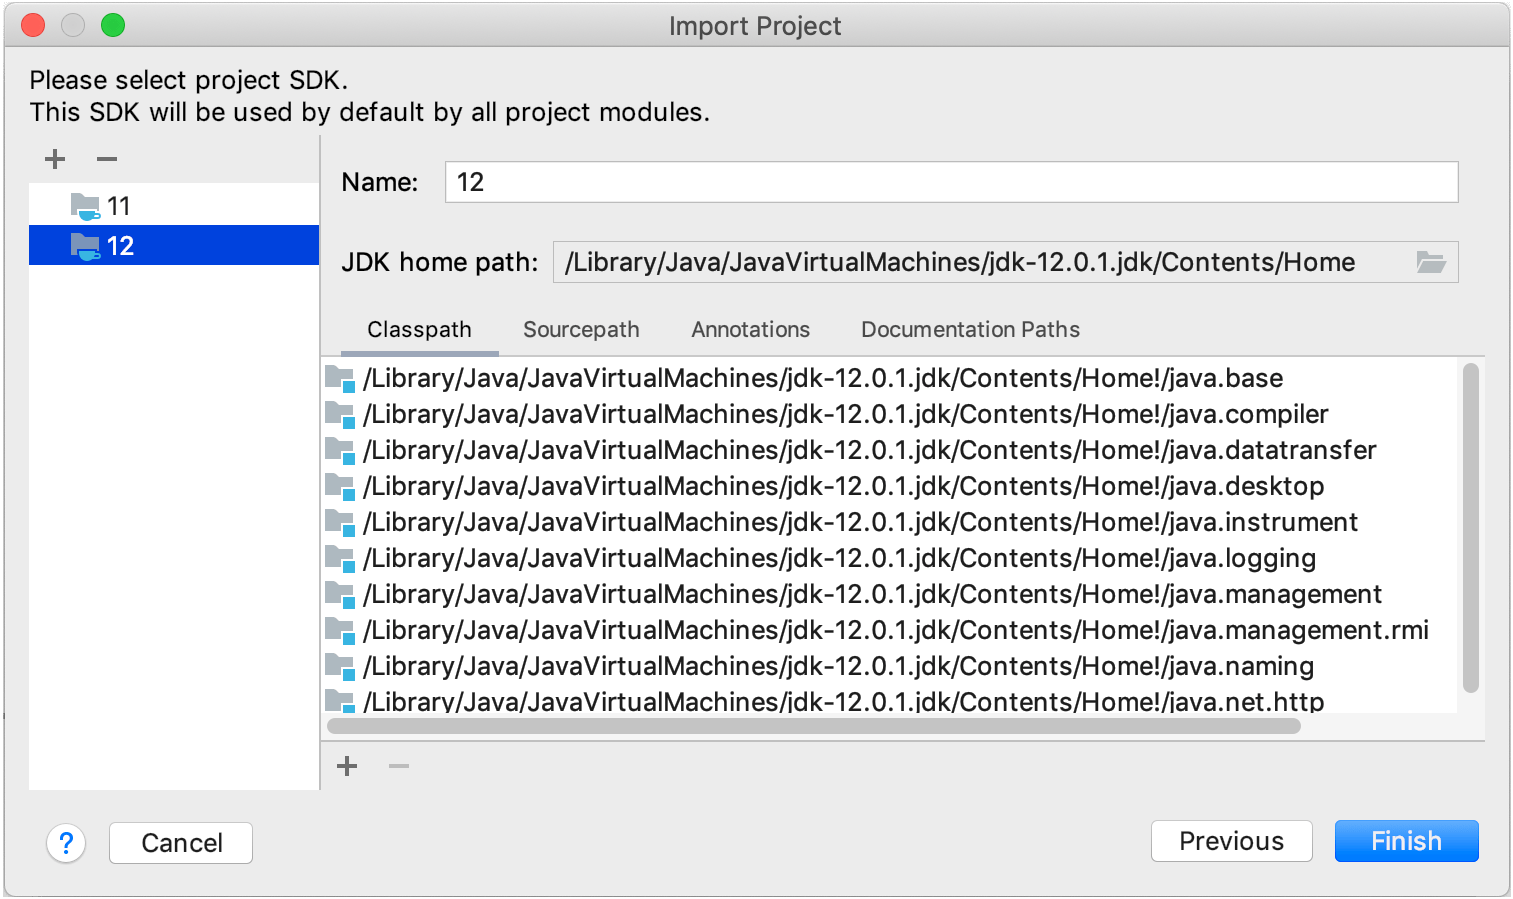 Importing a project from Bnd/Bndtools